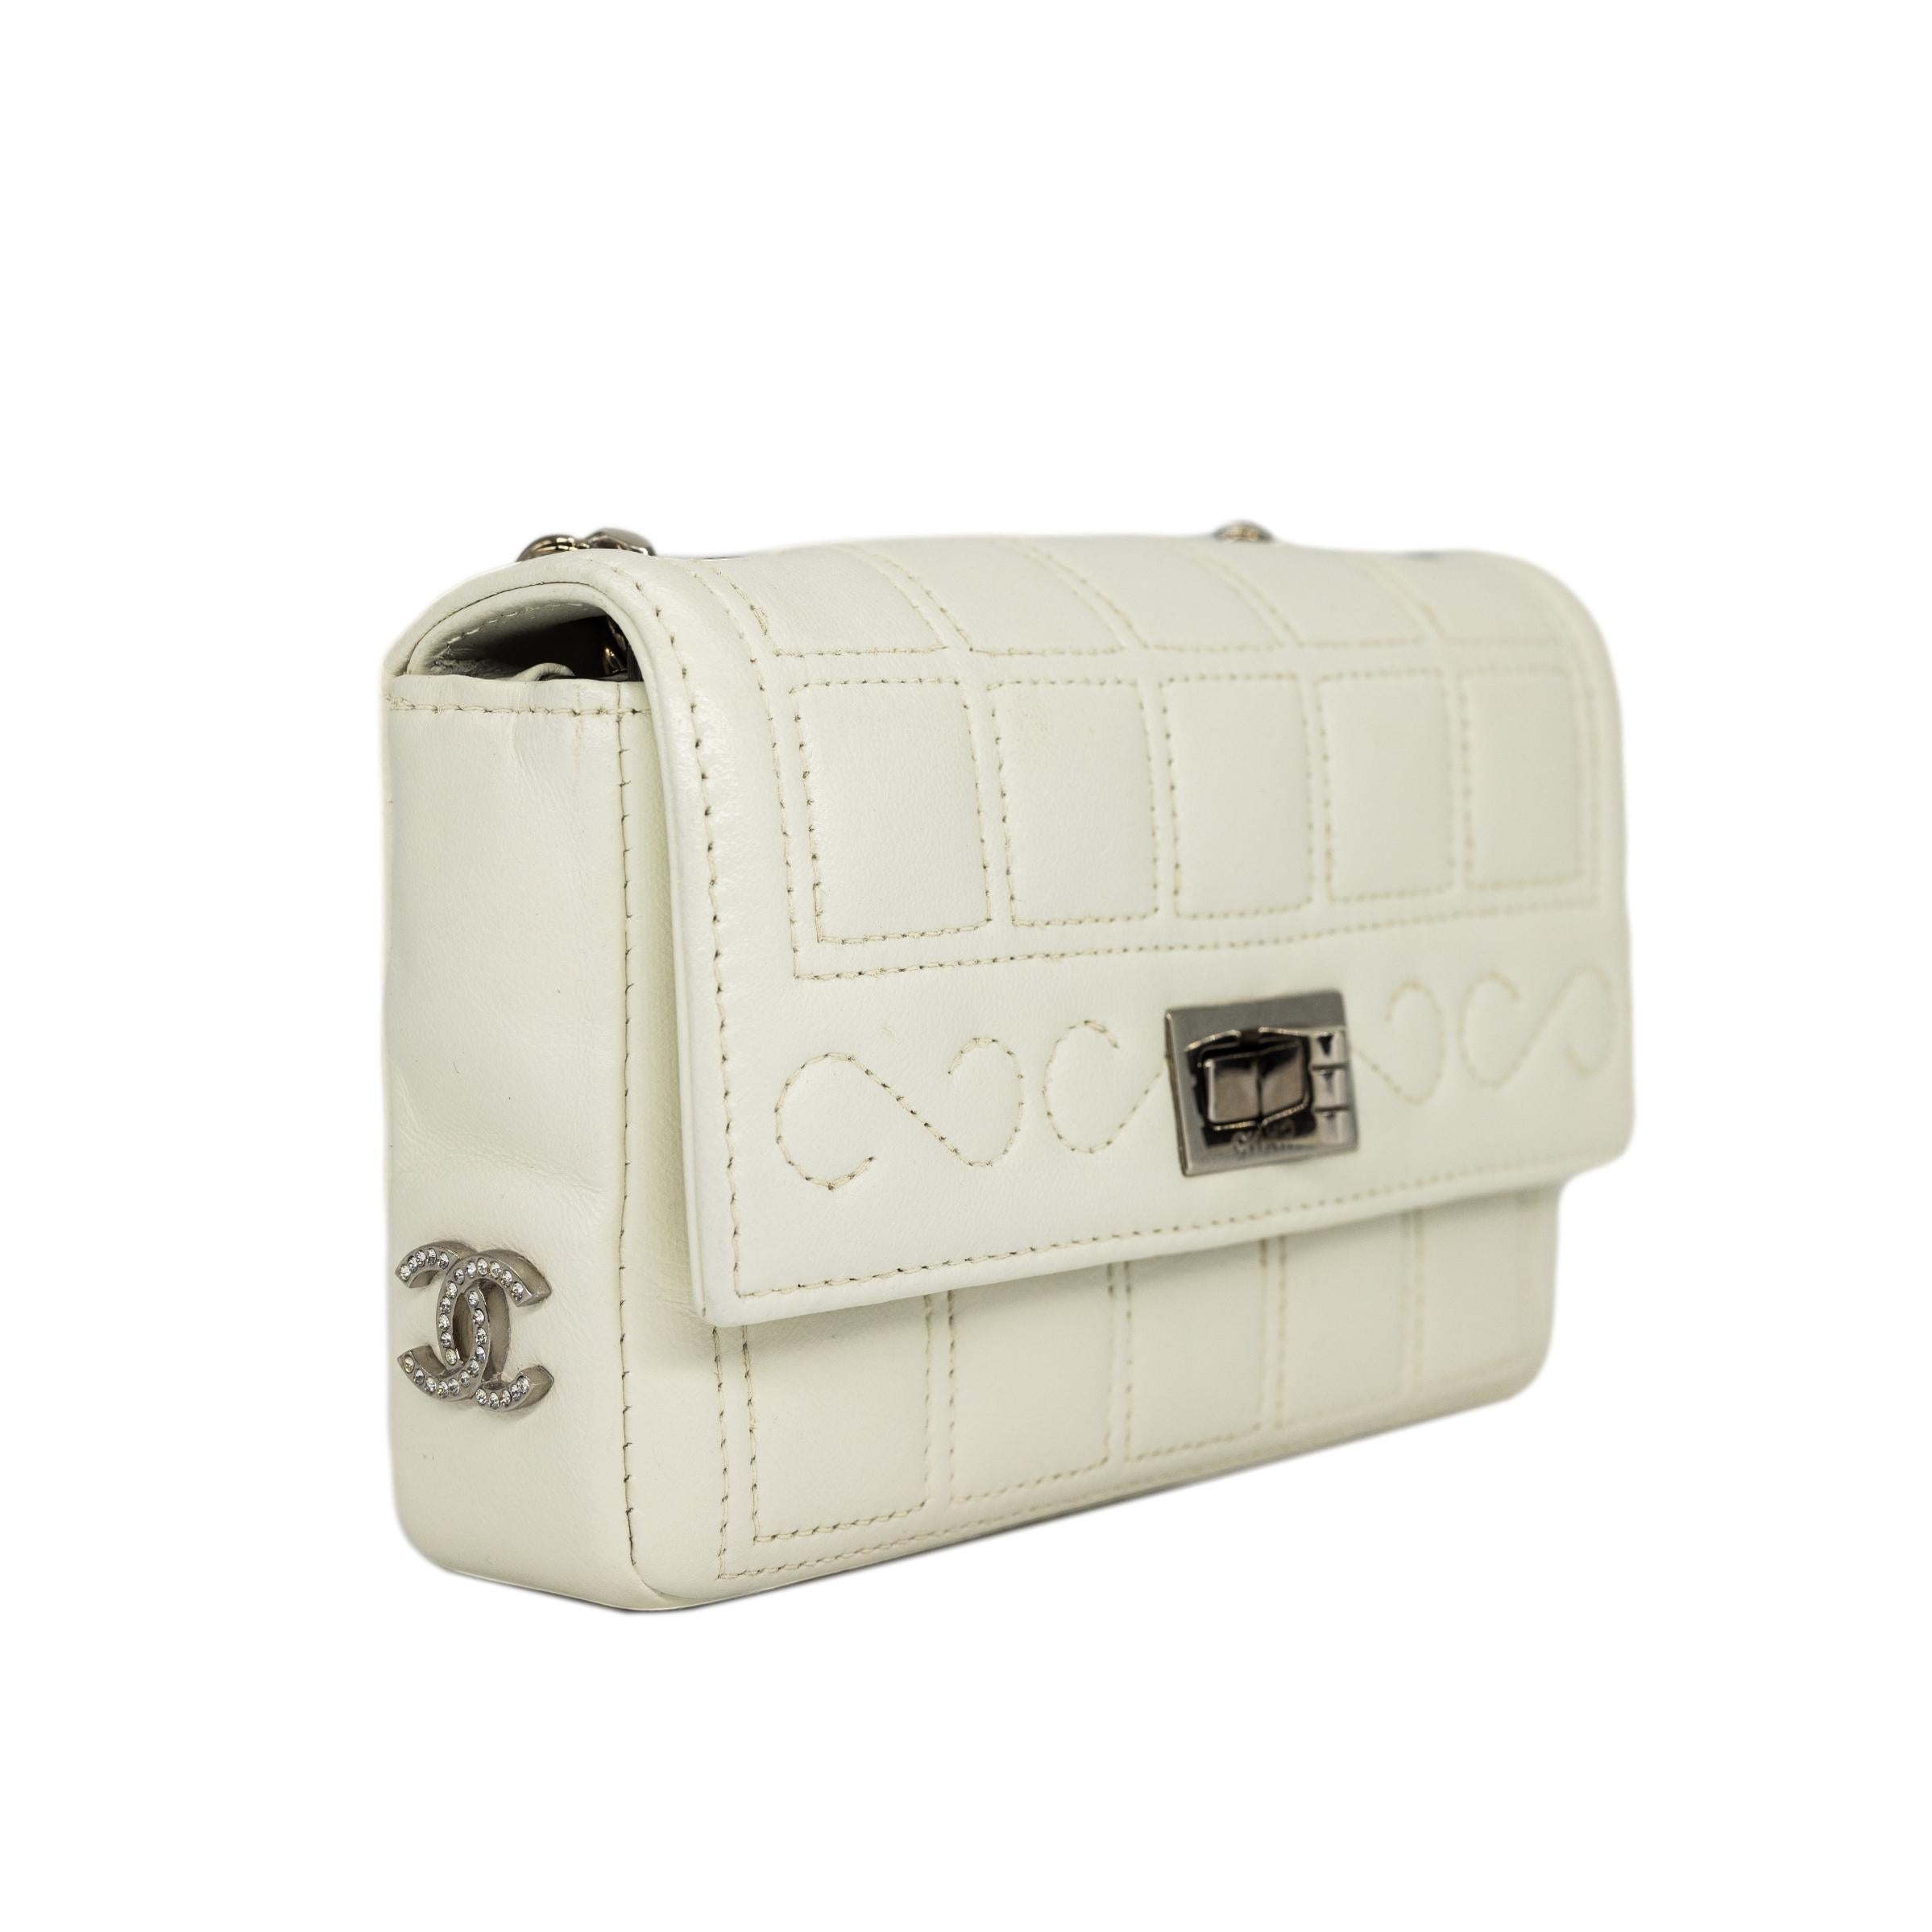 Chanel Limited Edition 2.55 Re-Issue White Mini Chocolate Bar Shoulder Bag, 2002 3